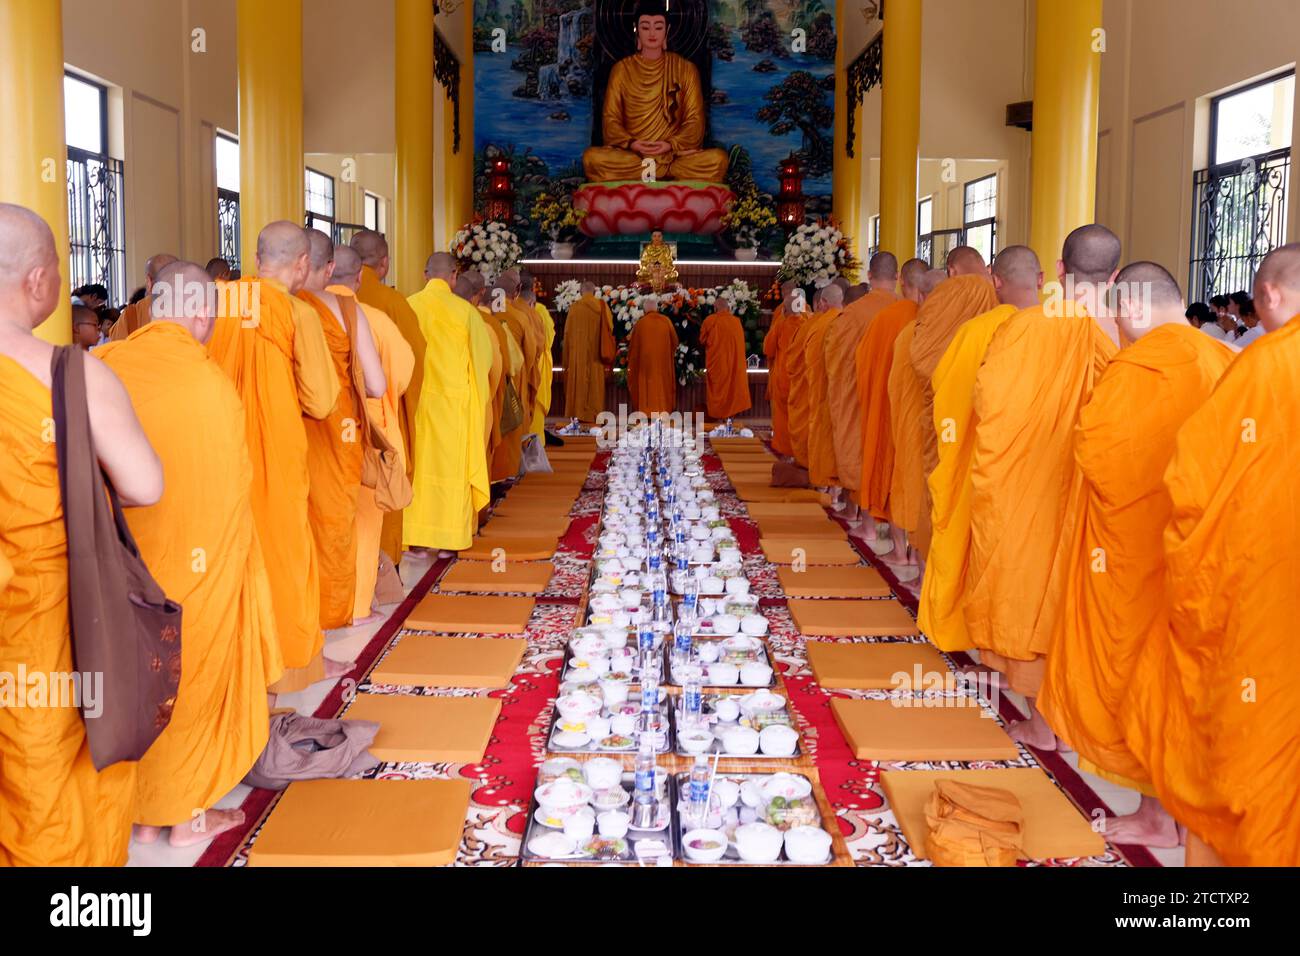 Phuoc Hue buddhist pagoda.  Monks at buddhist ceremony in the main  hall. Vegetarian meal.  Vietnam. Stock Photo